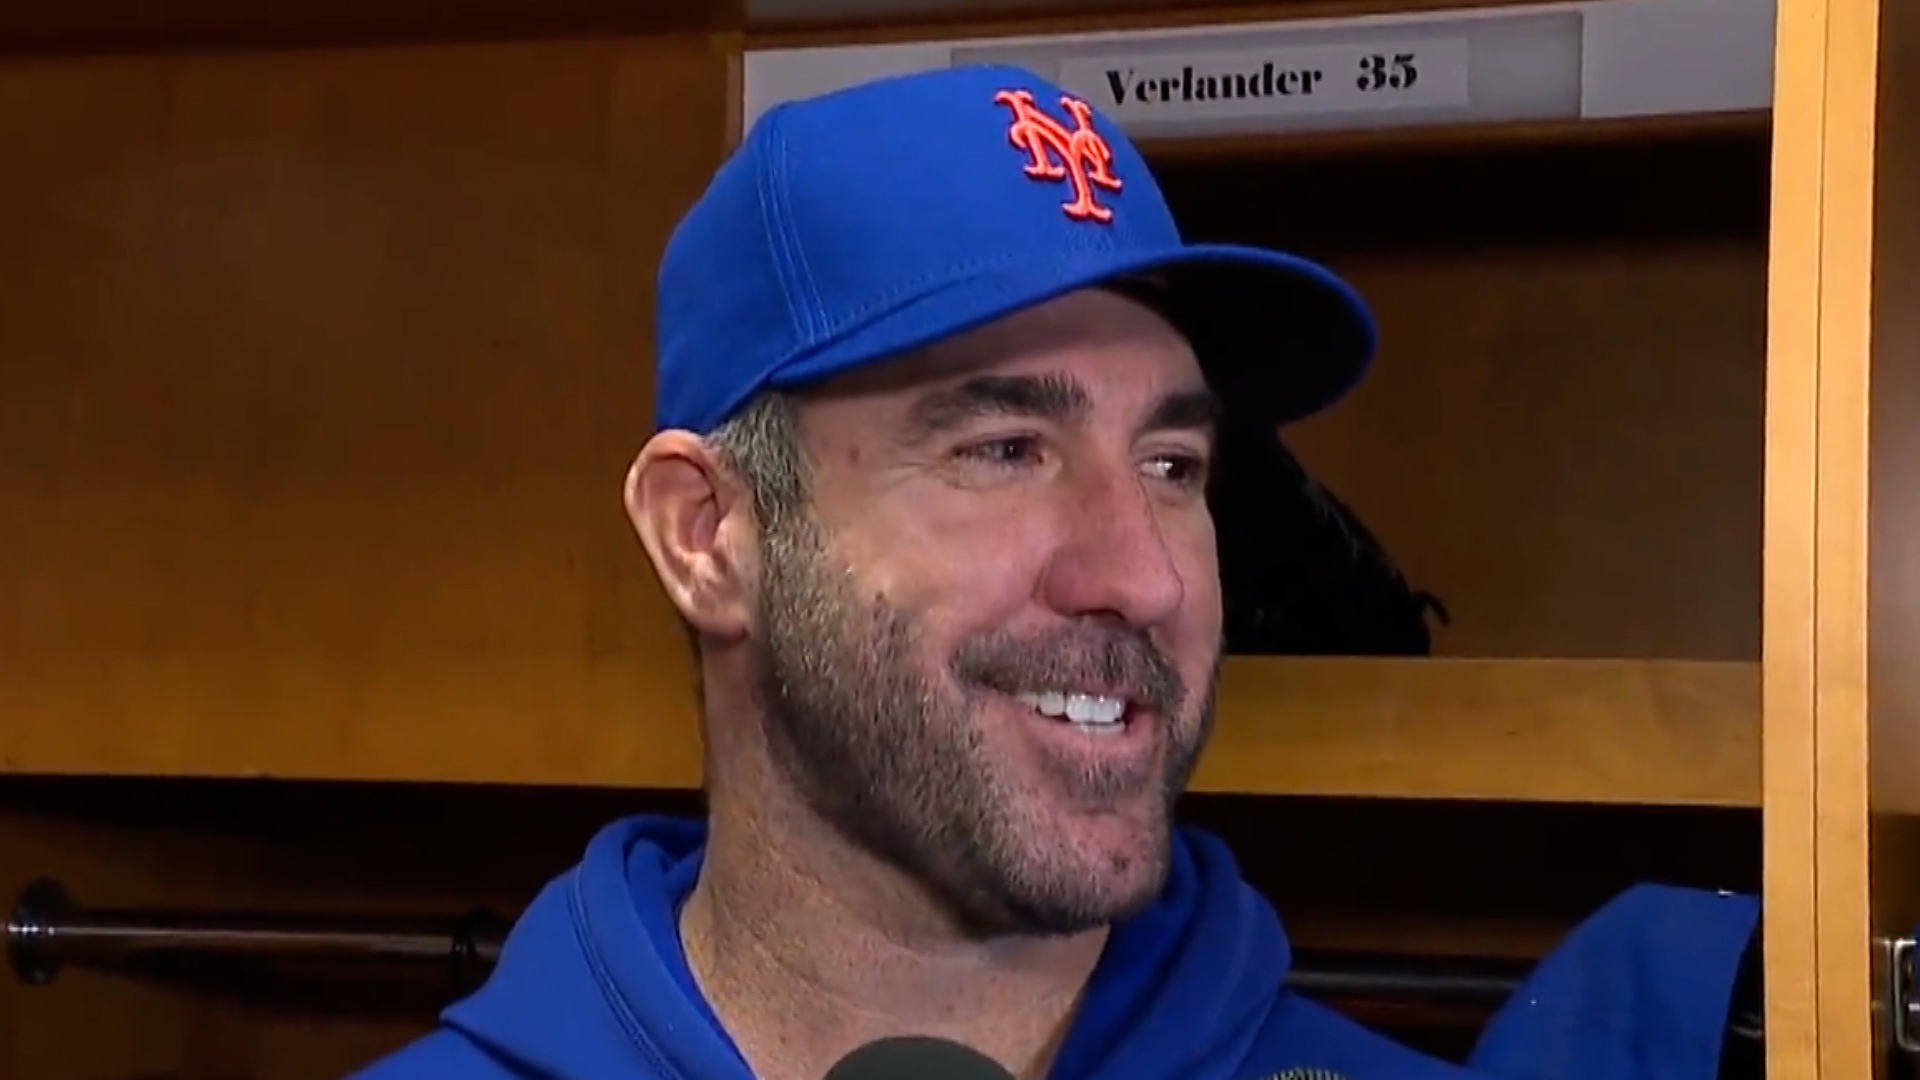 Justin Verlander laughs off difficult Hall of Fame question: 'Boy is that unfair'